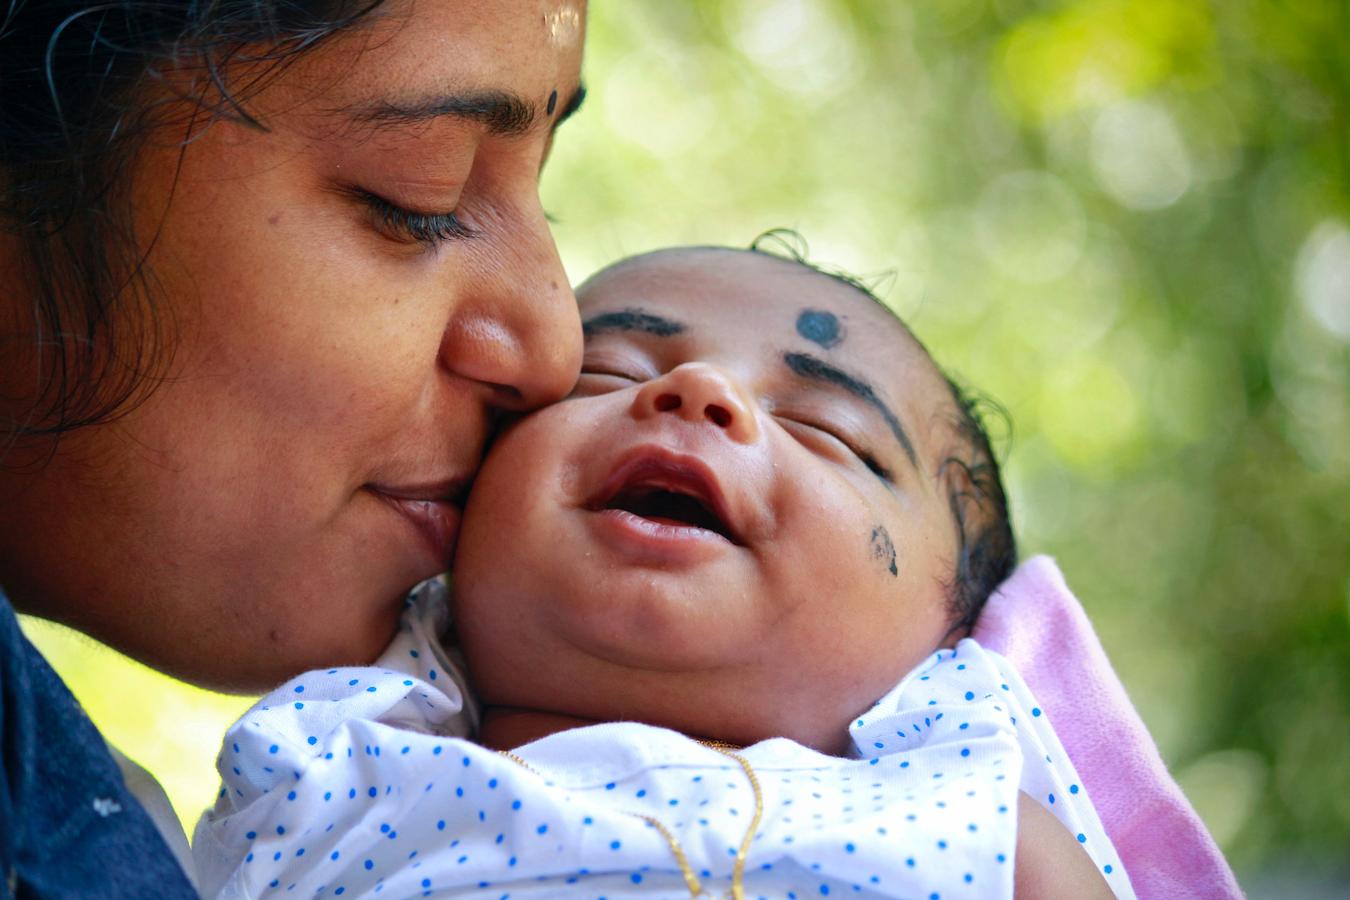 Breastfeeding a baby can help brain development and lower risk of respiratory infections